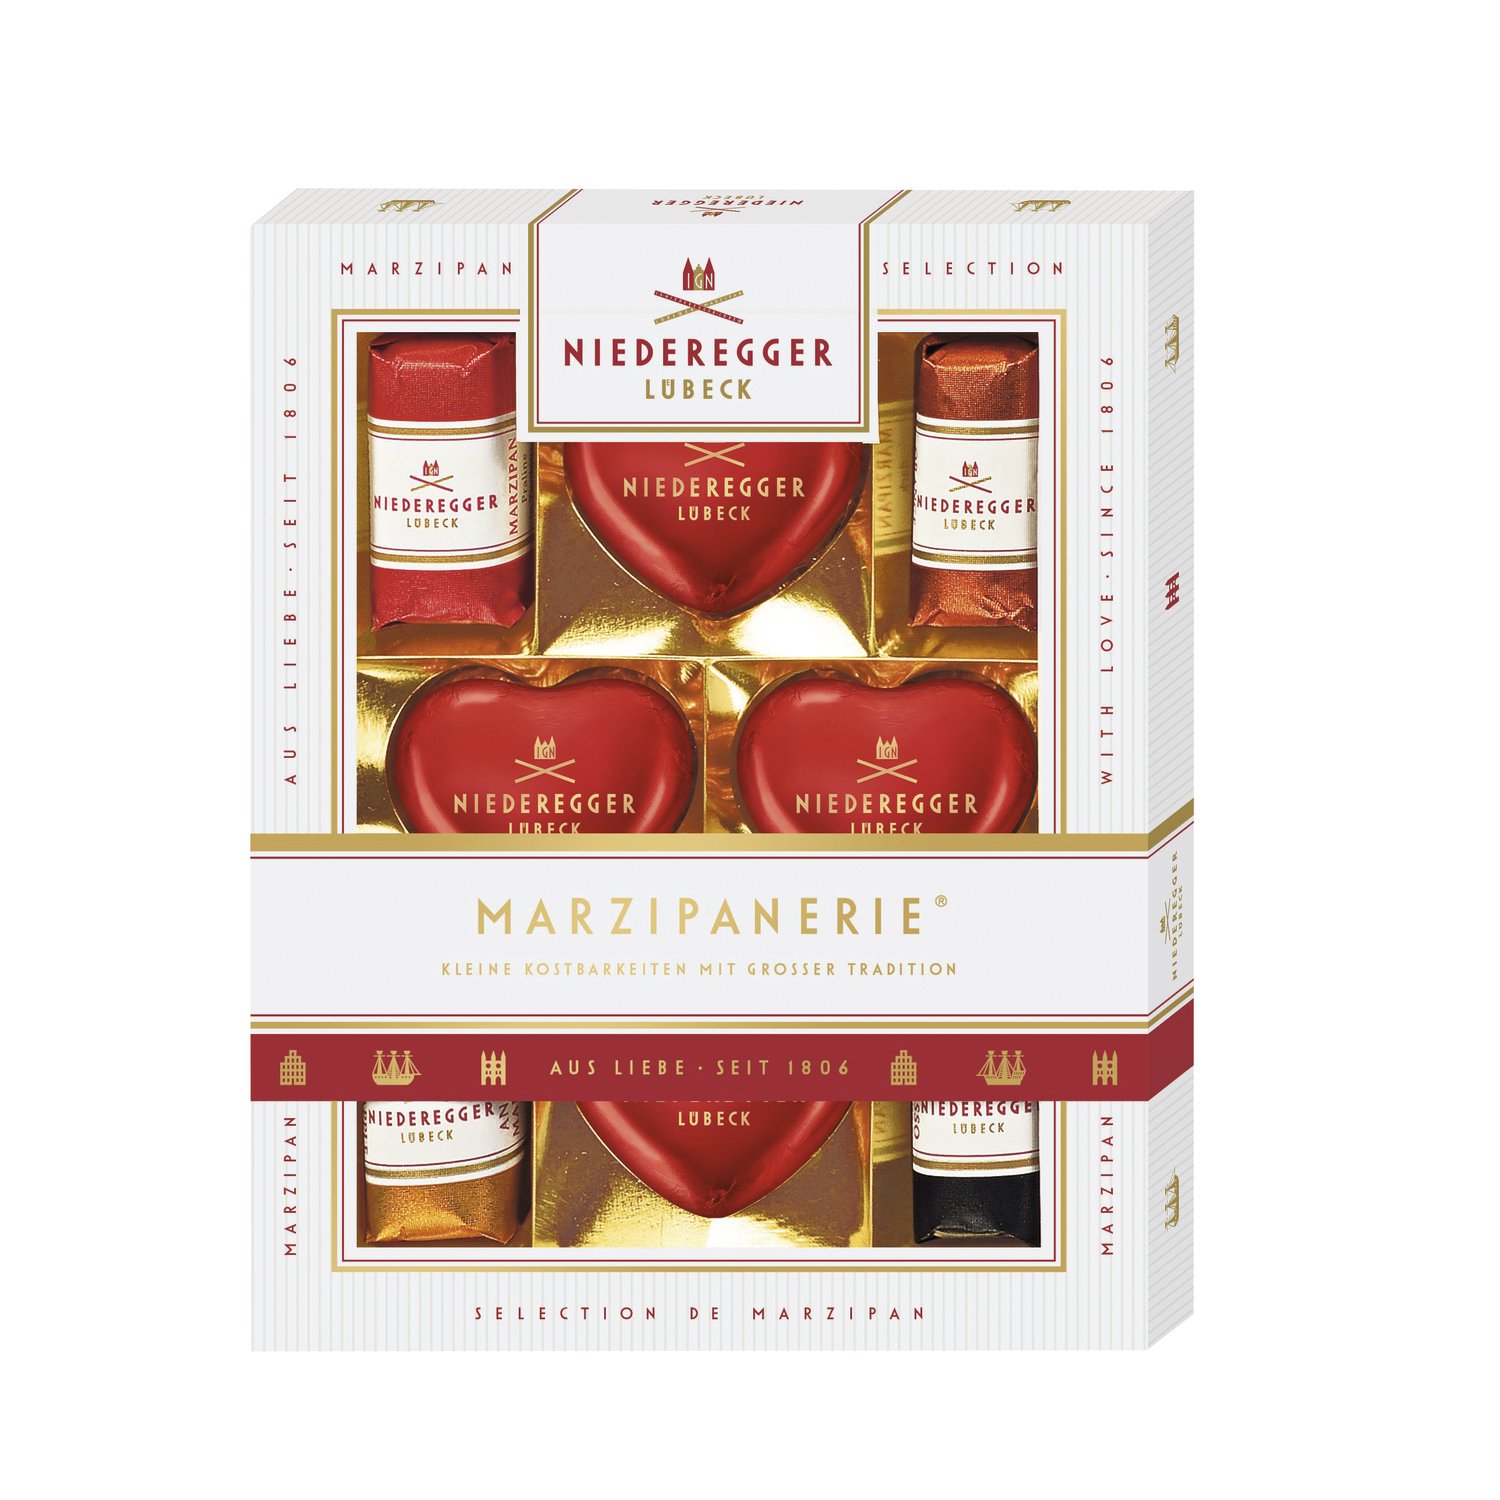 Marzipanerie - a selection of assorted marzipan treats - 10x100g